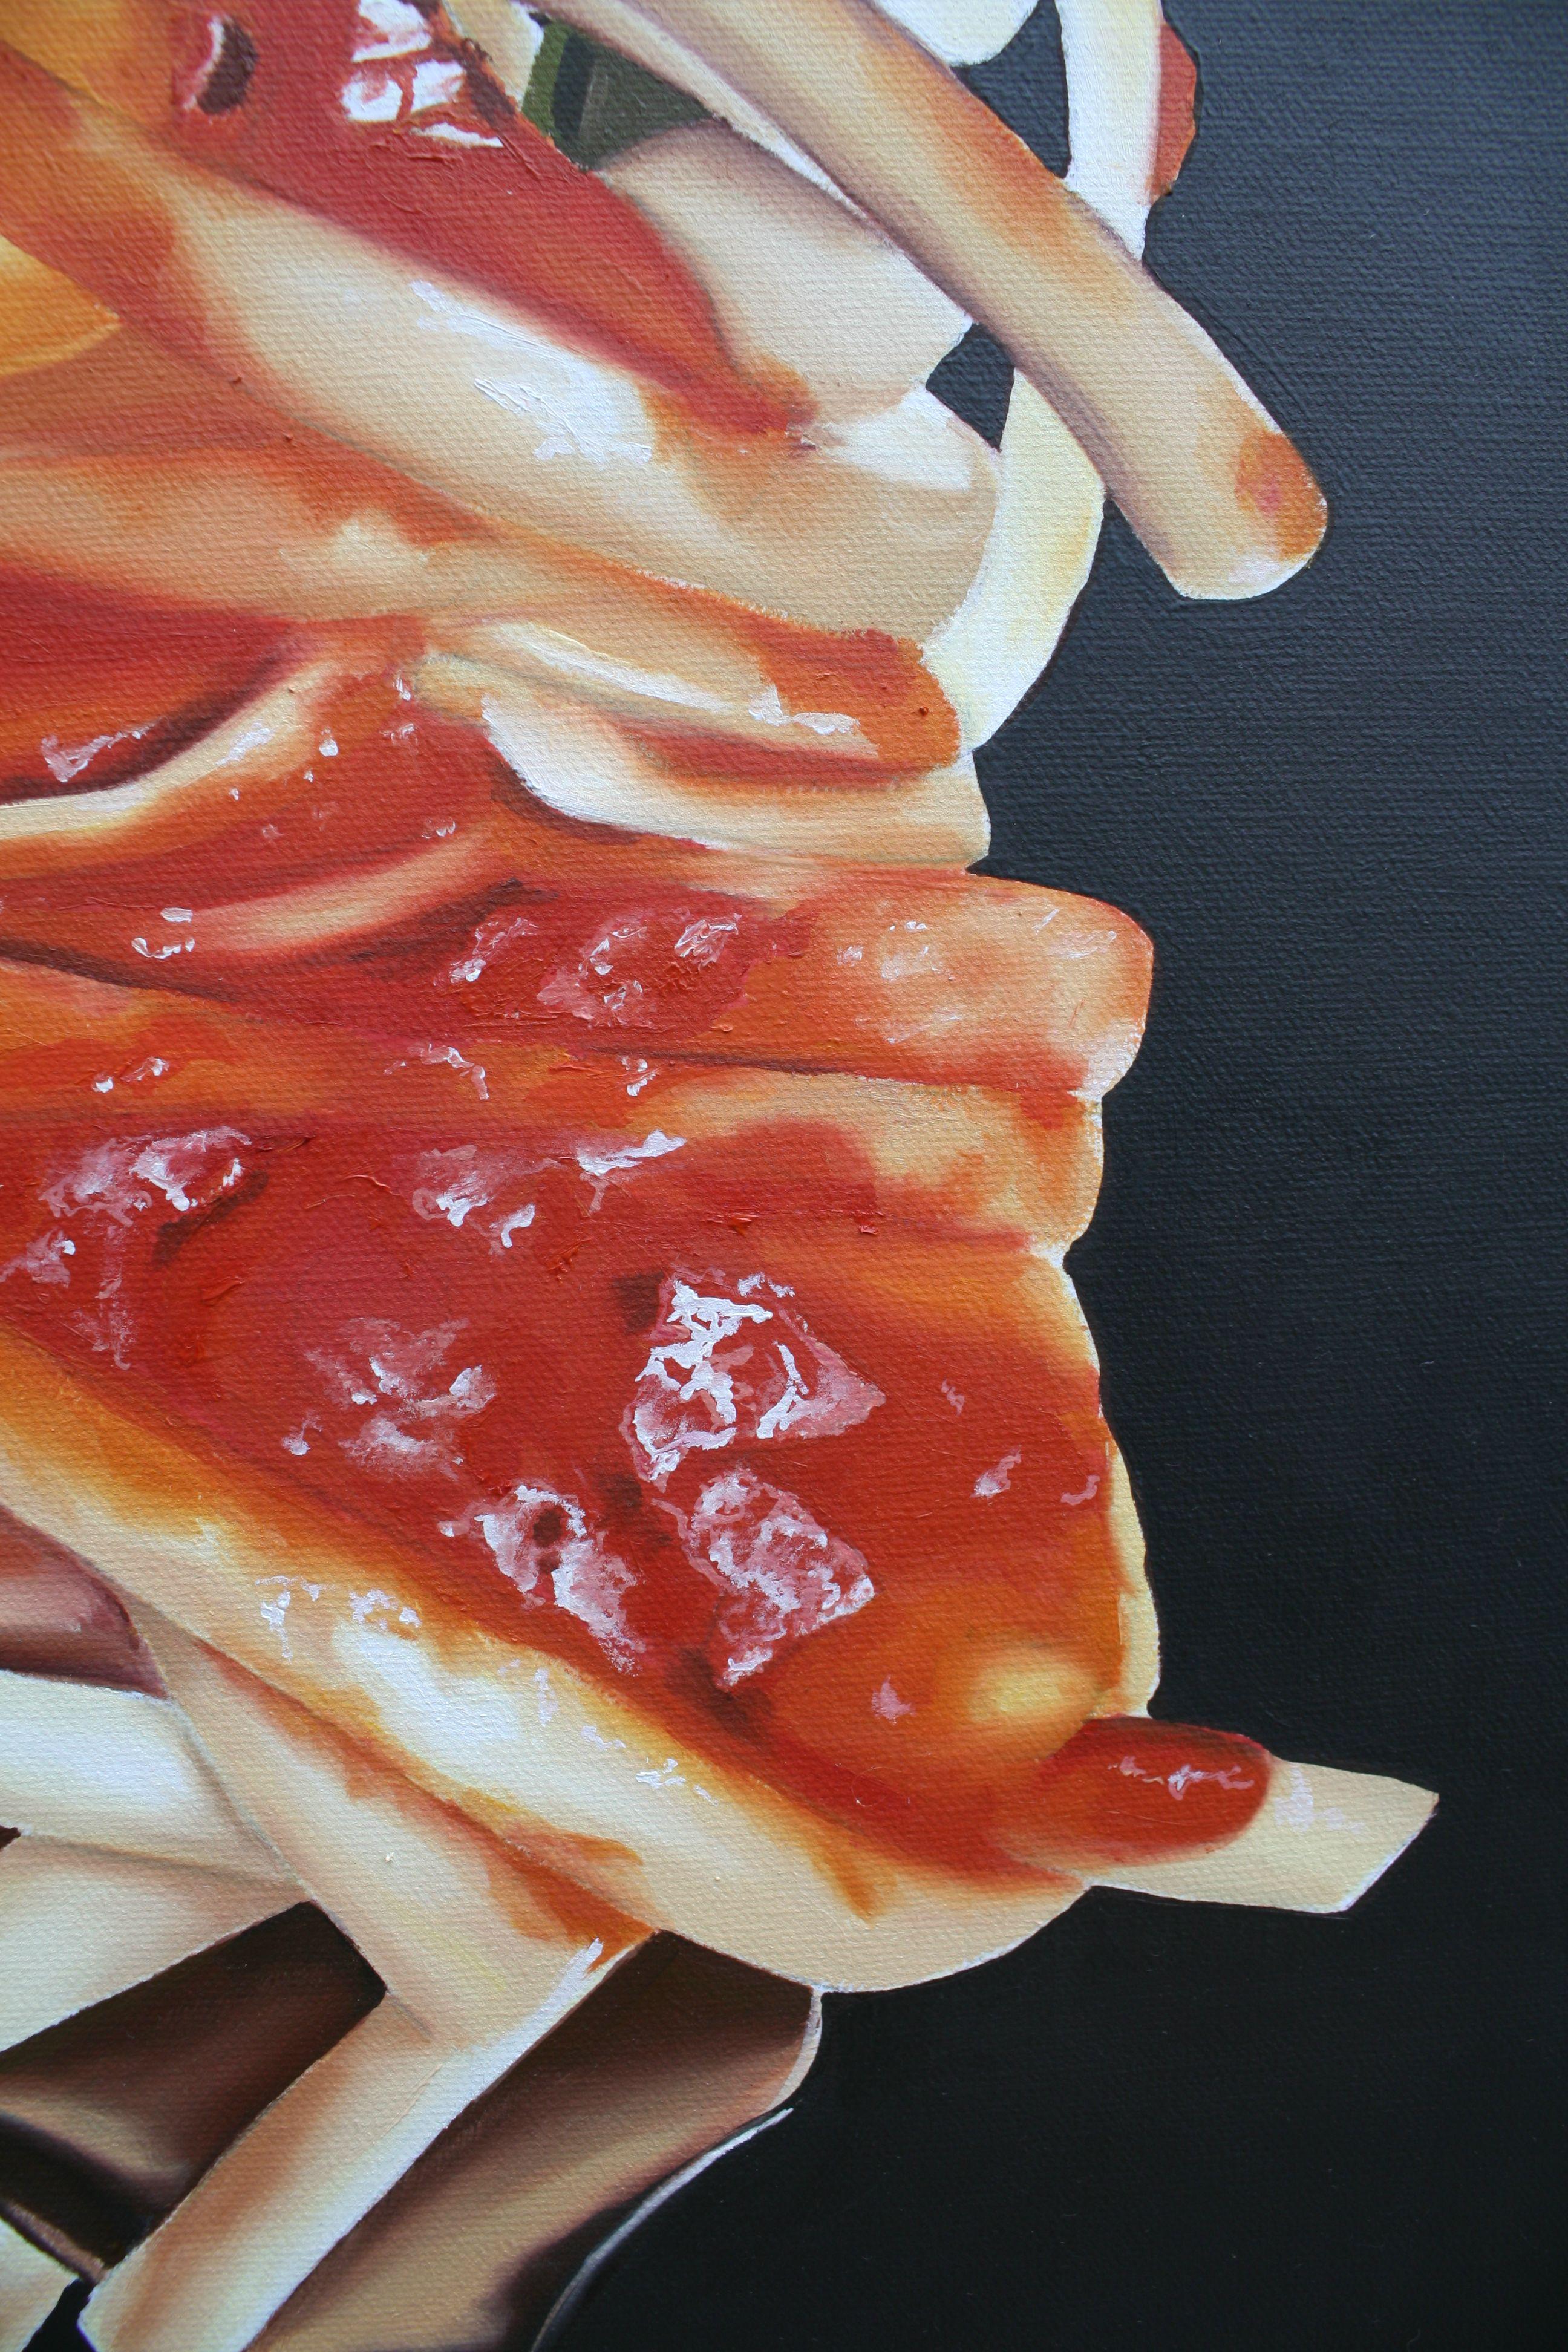 Oil on canvas  The pasta taste, one of my favorite subjects and courses I chose this topic for its ability to arouse the emotion I feel in those moments before the wonderful flavor of good pasta with tomato souce. The only watch it makes me want to